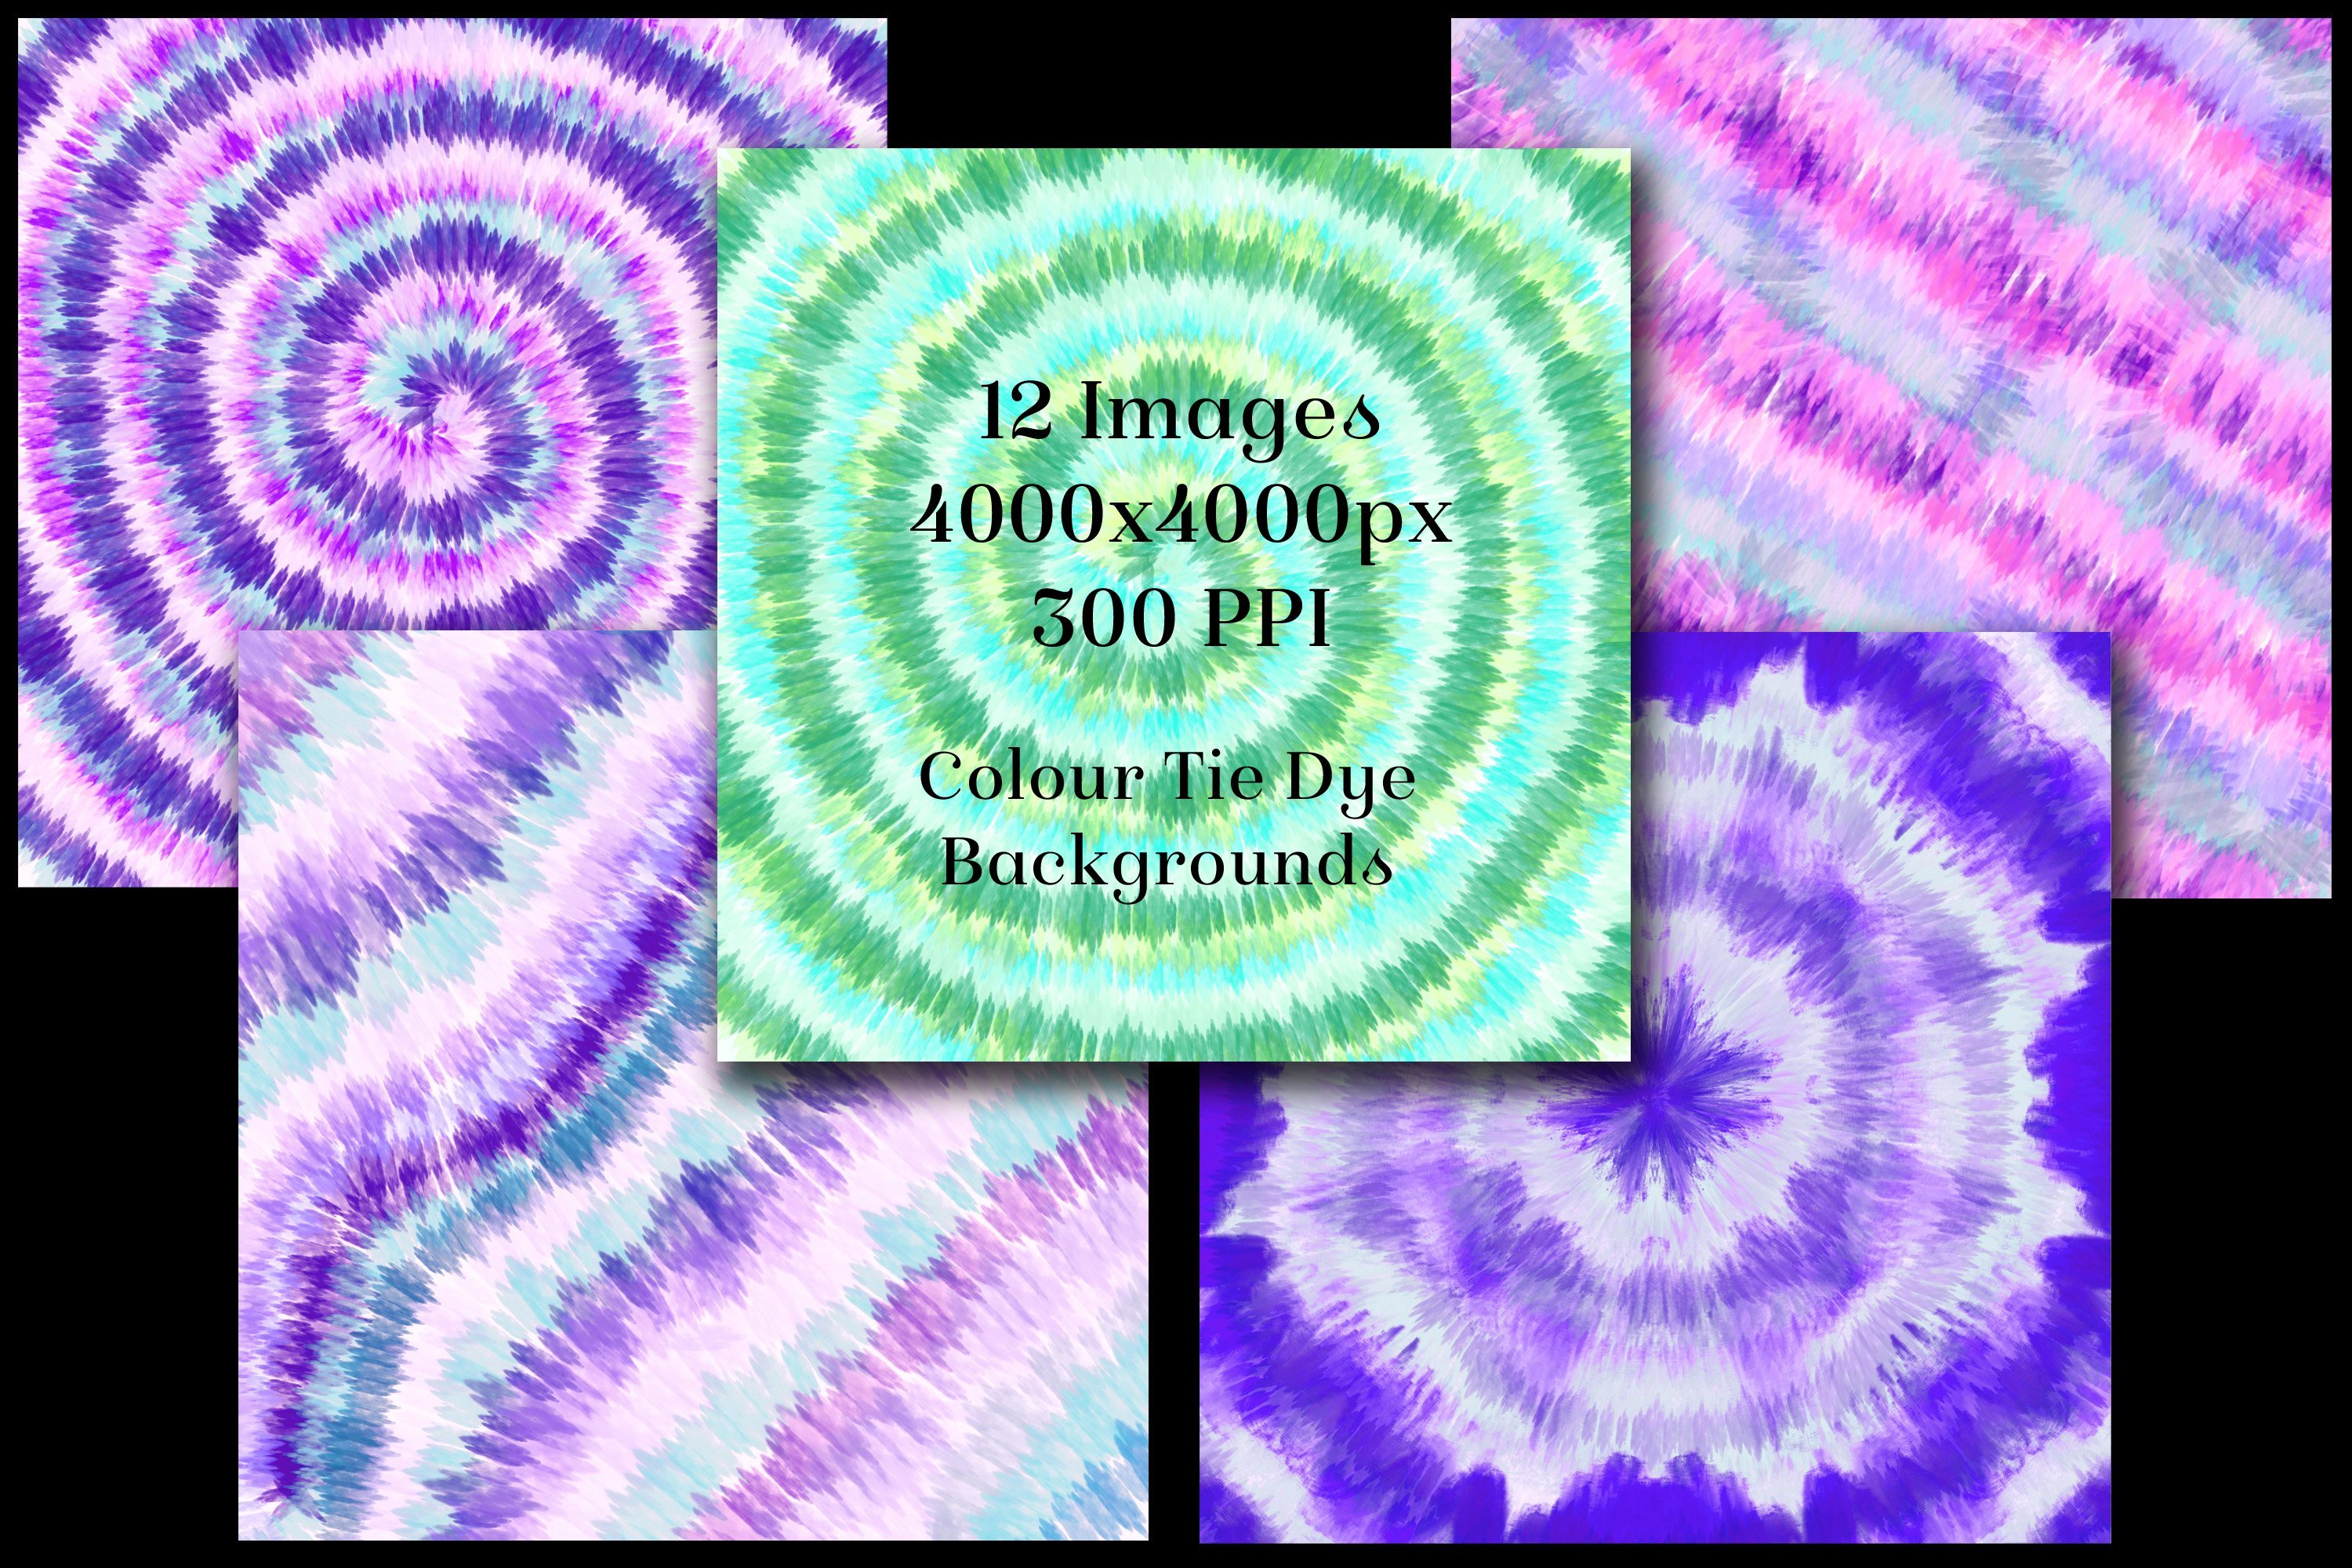 Colour Tie Dye Backgrounds preview image.